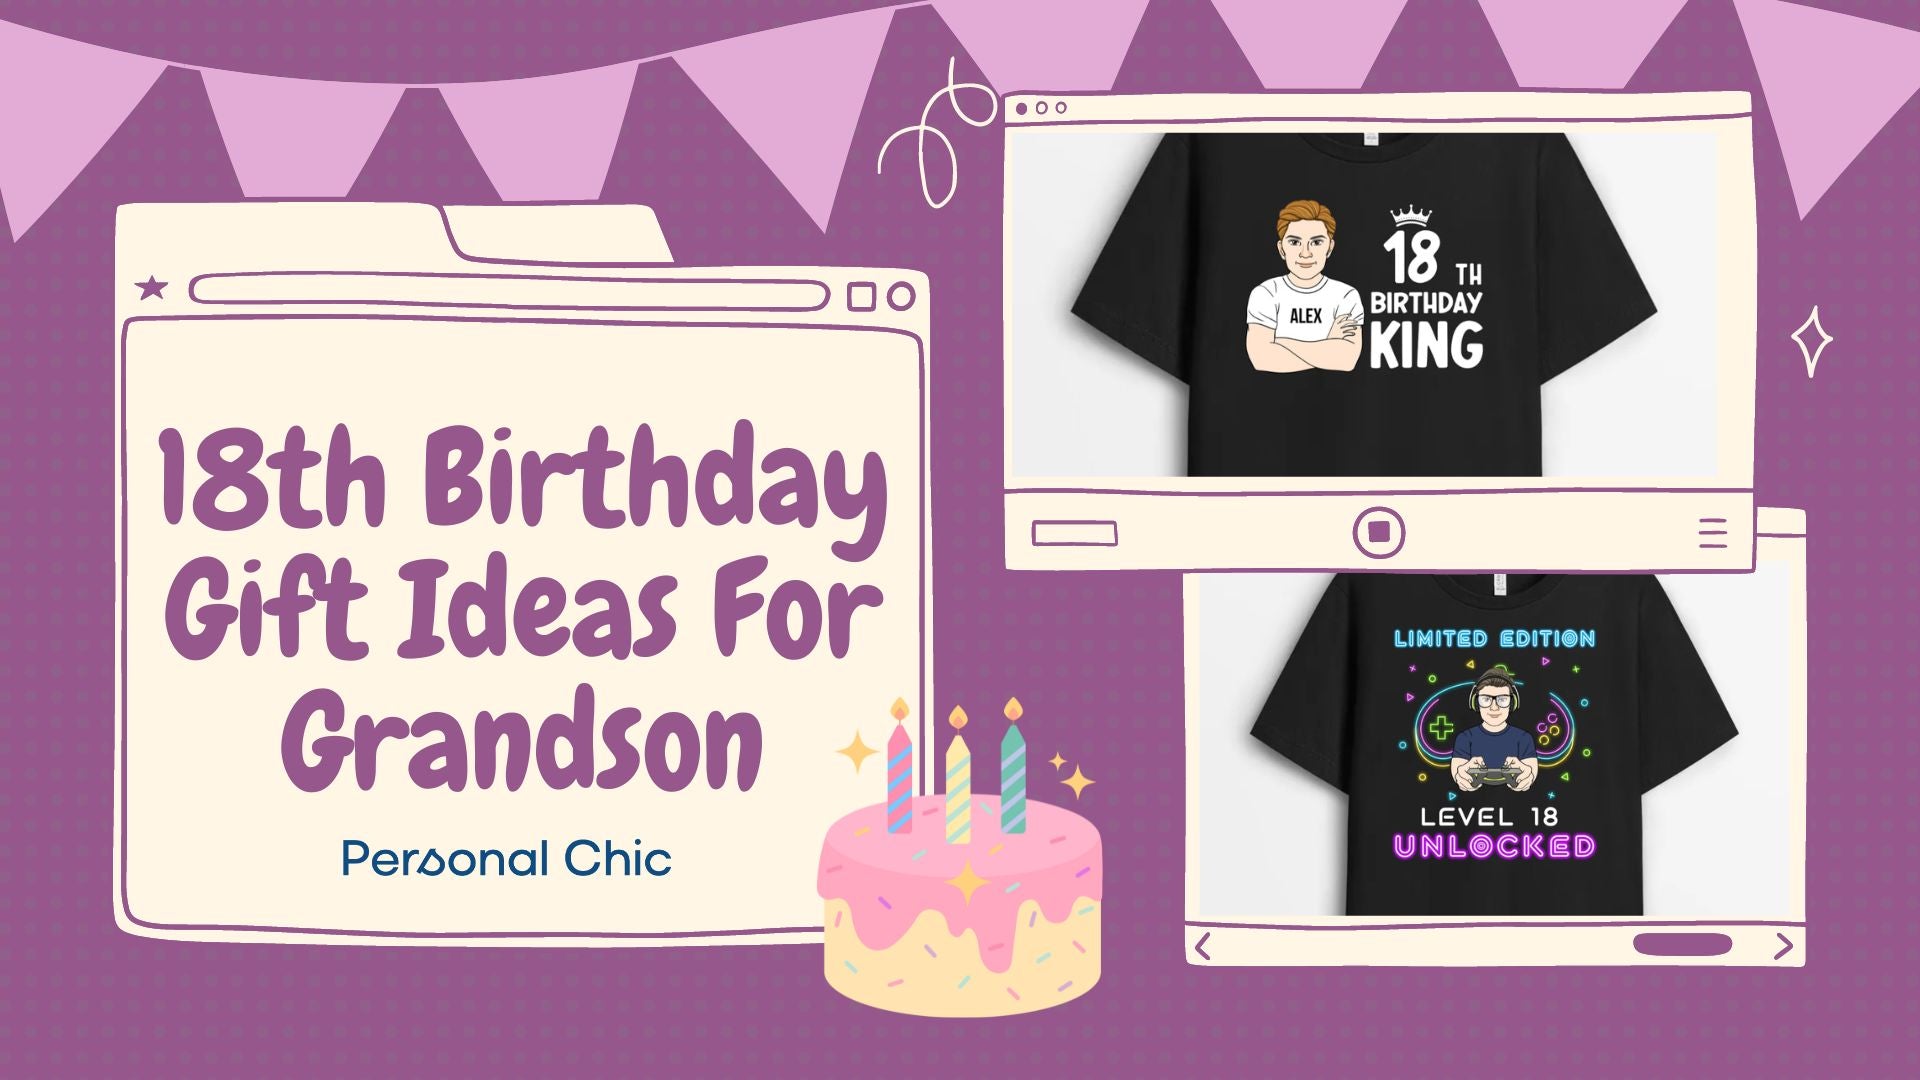 Top 28 Meaningful 18th Birthday Gift Ideas For Grandson - Personal Chic